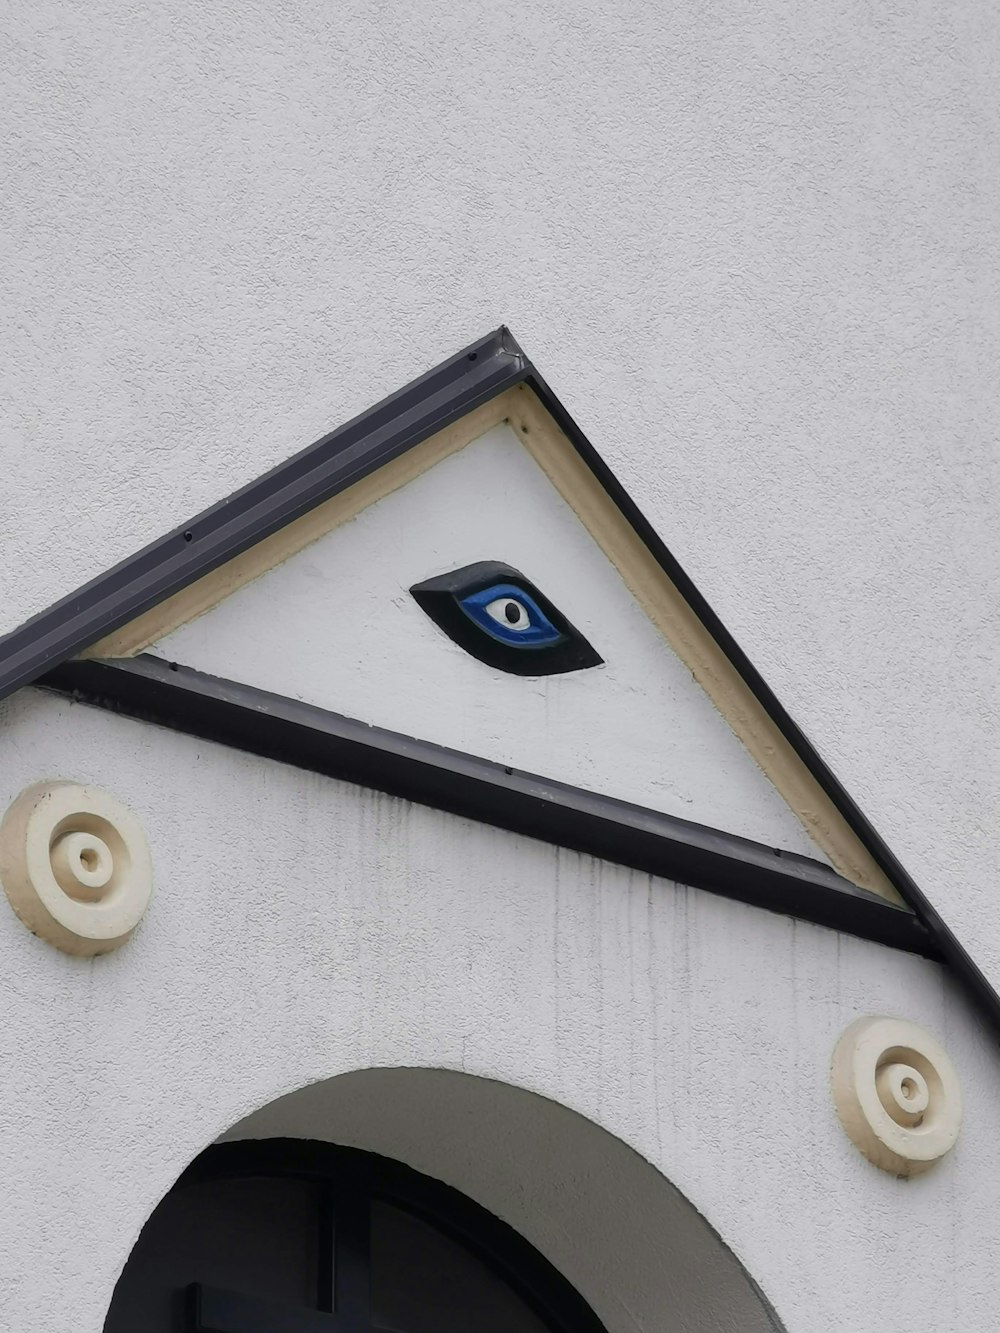 a close up of a building with an eye on it